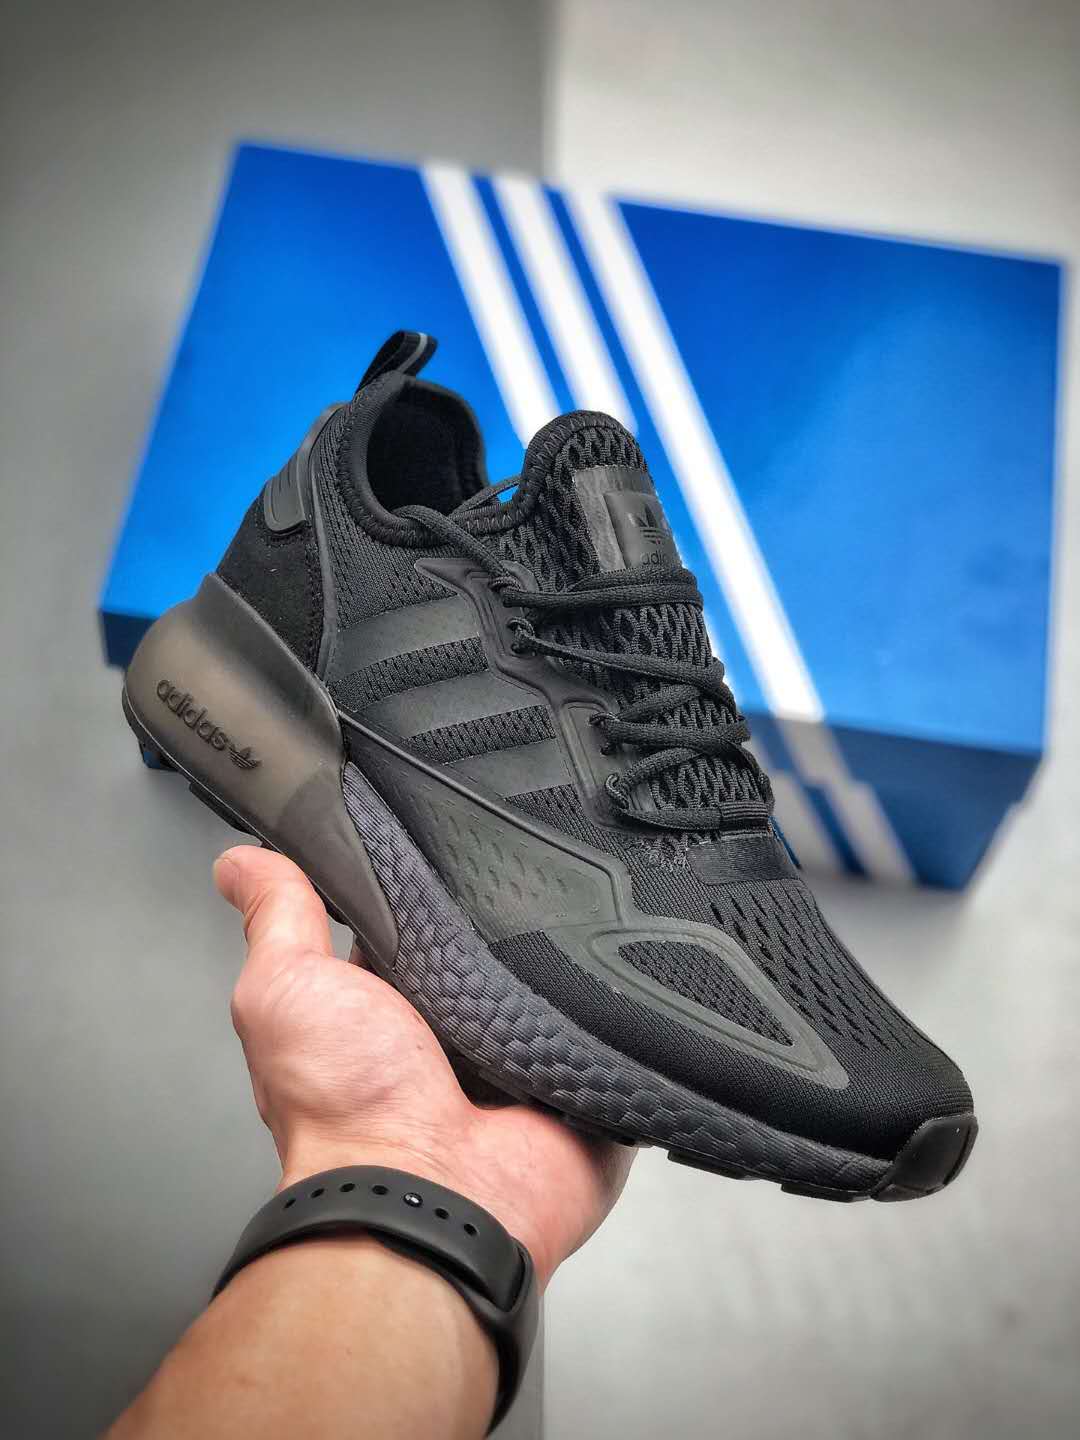 Adidas Originals ZX 2K Boost Triple Black FV7478 - Stylish and Comfortable Trainers for Men